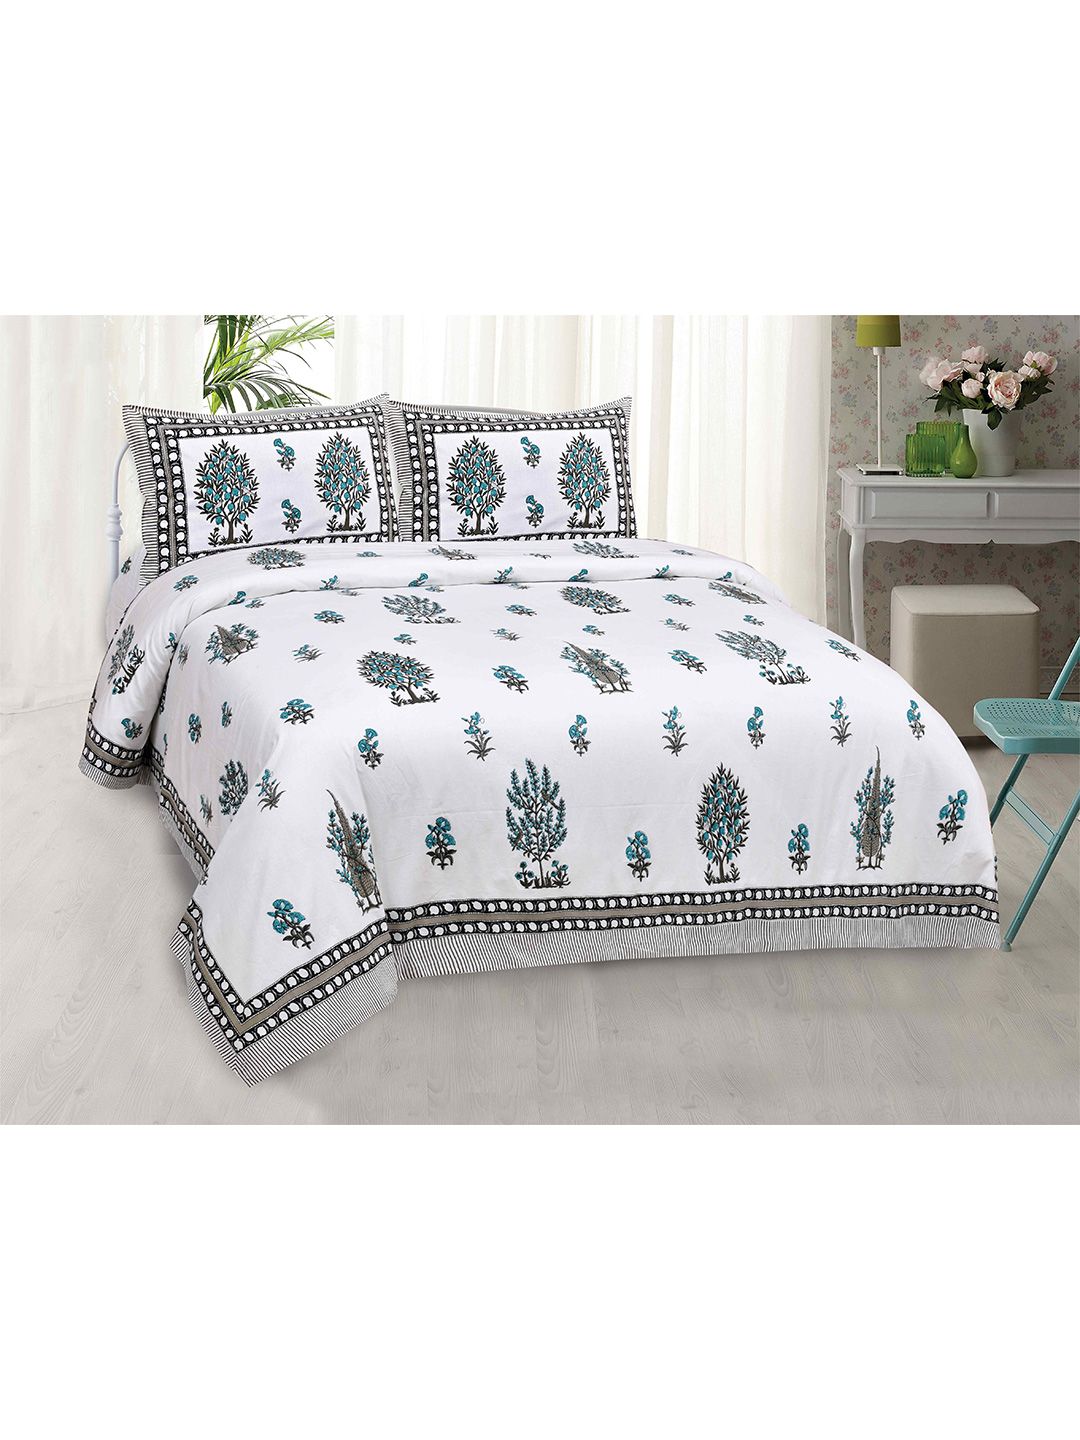 JAIPUR FABRIC Black & White Floral Cotton Hand Block King Bedsheet with 2 Pillow Covers Price in India